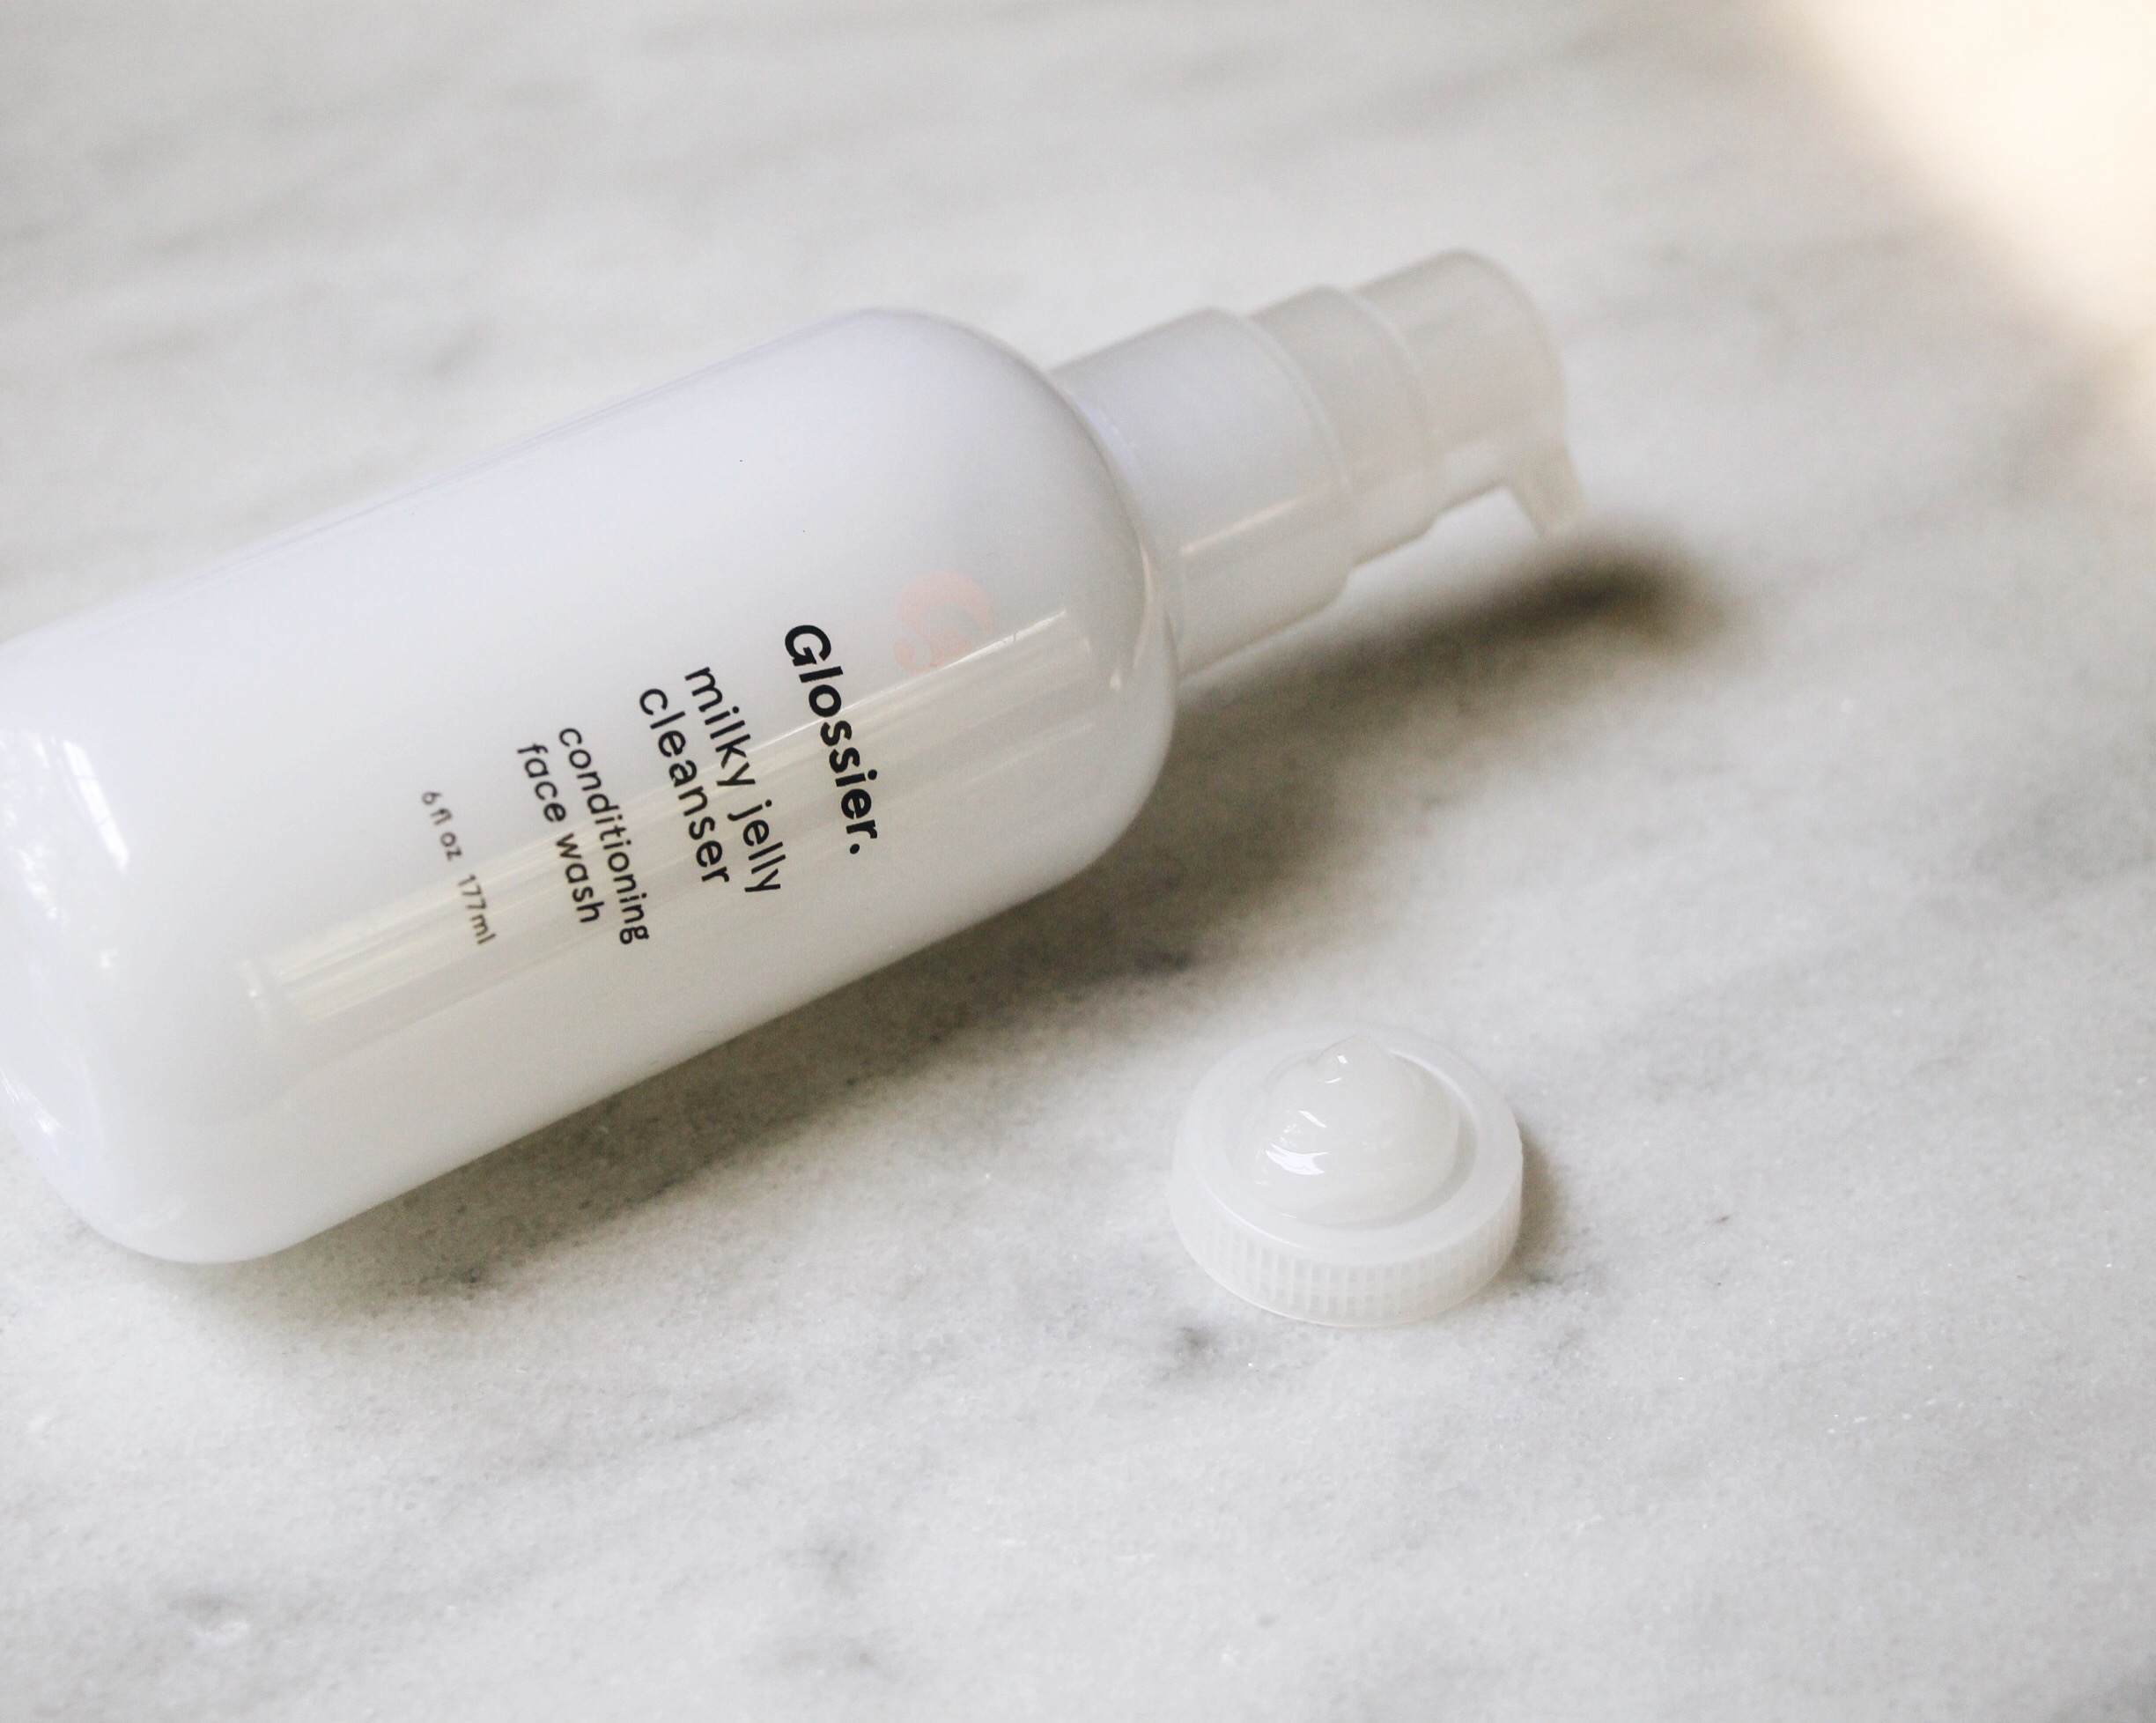 Glossier Milky Jelly Cleanser Review